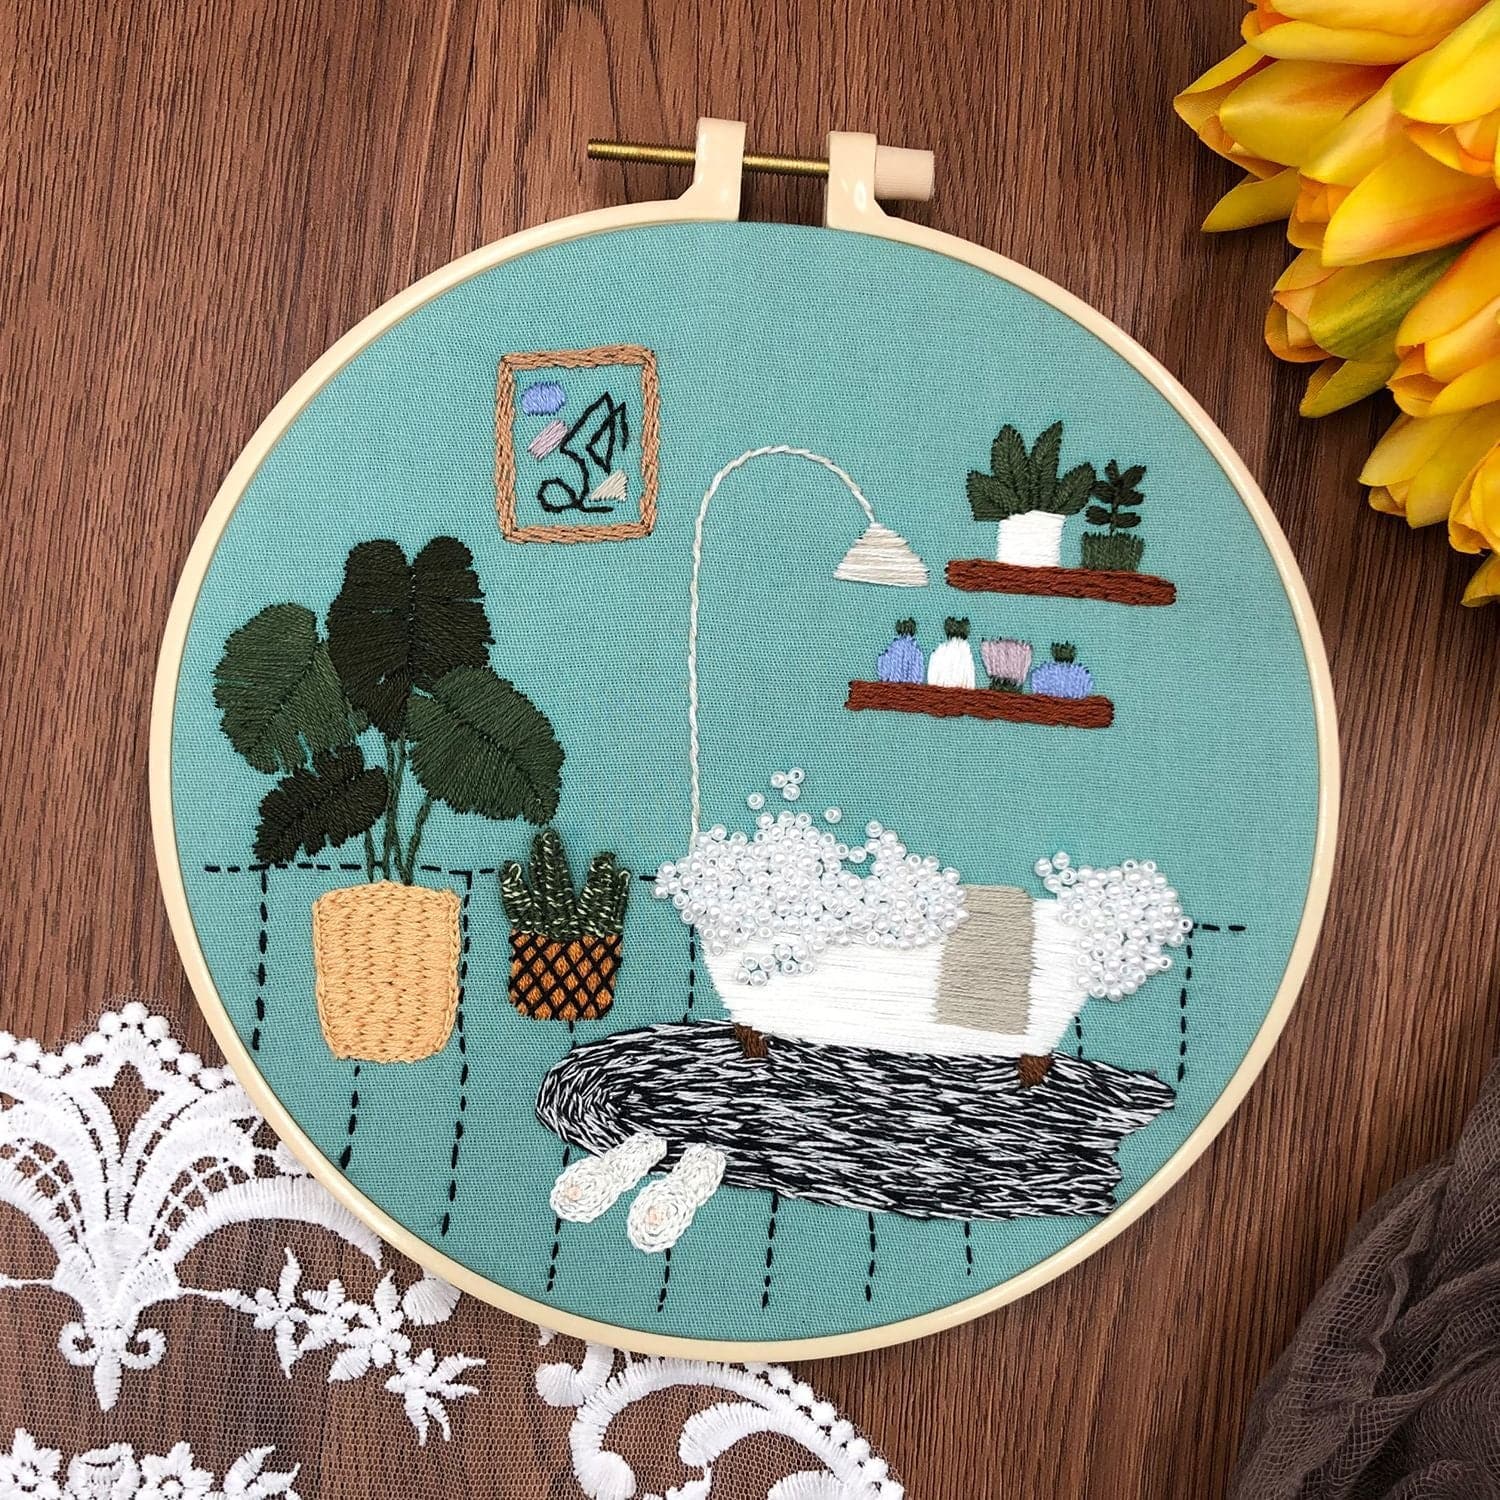 "A corner of the family" - Embroidery ktclubs.com